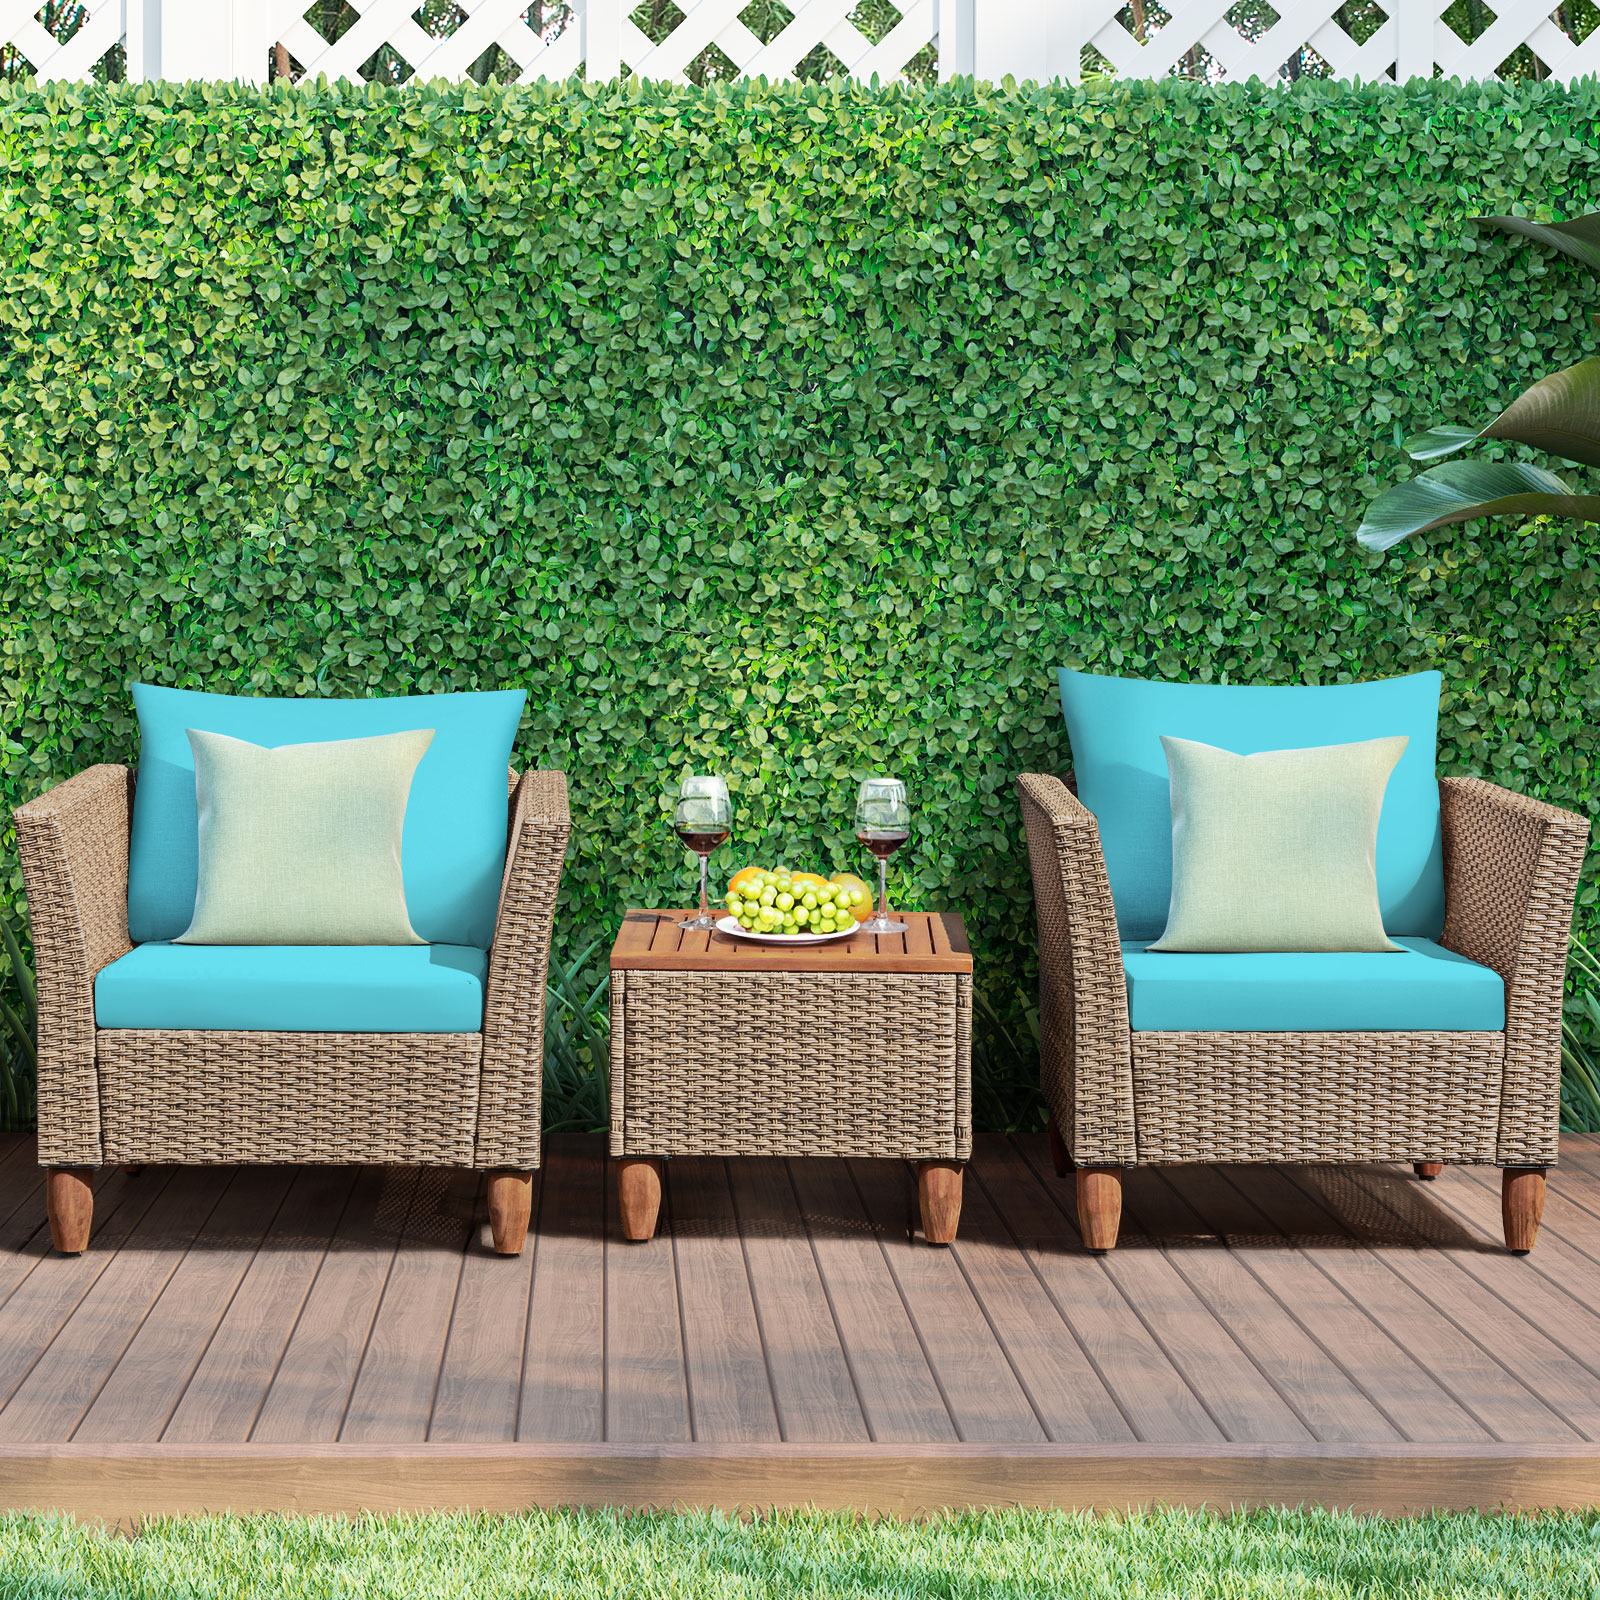 Patiojoy 3 Piece Outdoor Rattan Sofa Set Wicker Conversation Furniture Set with Turquoise Cushions - image 1 of 9